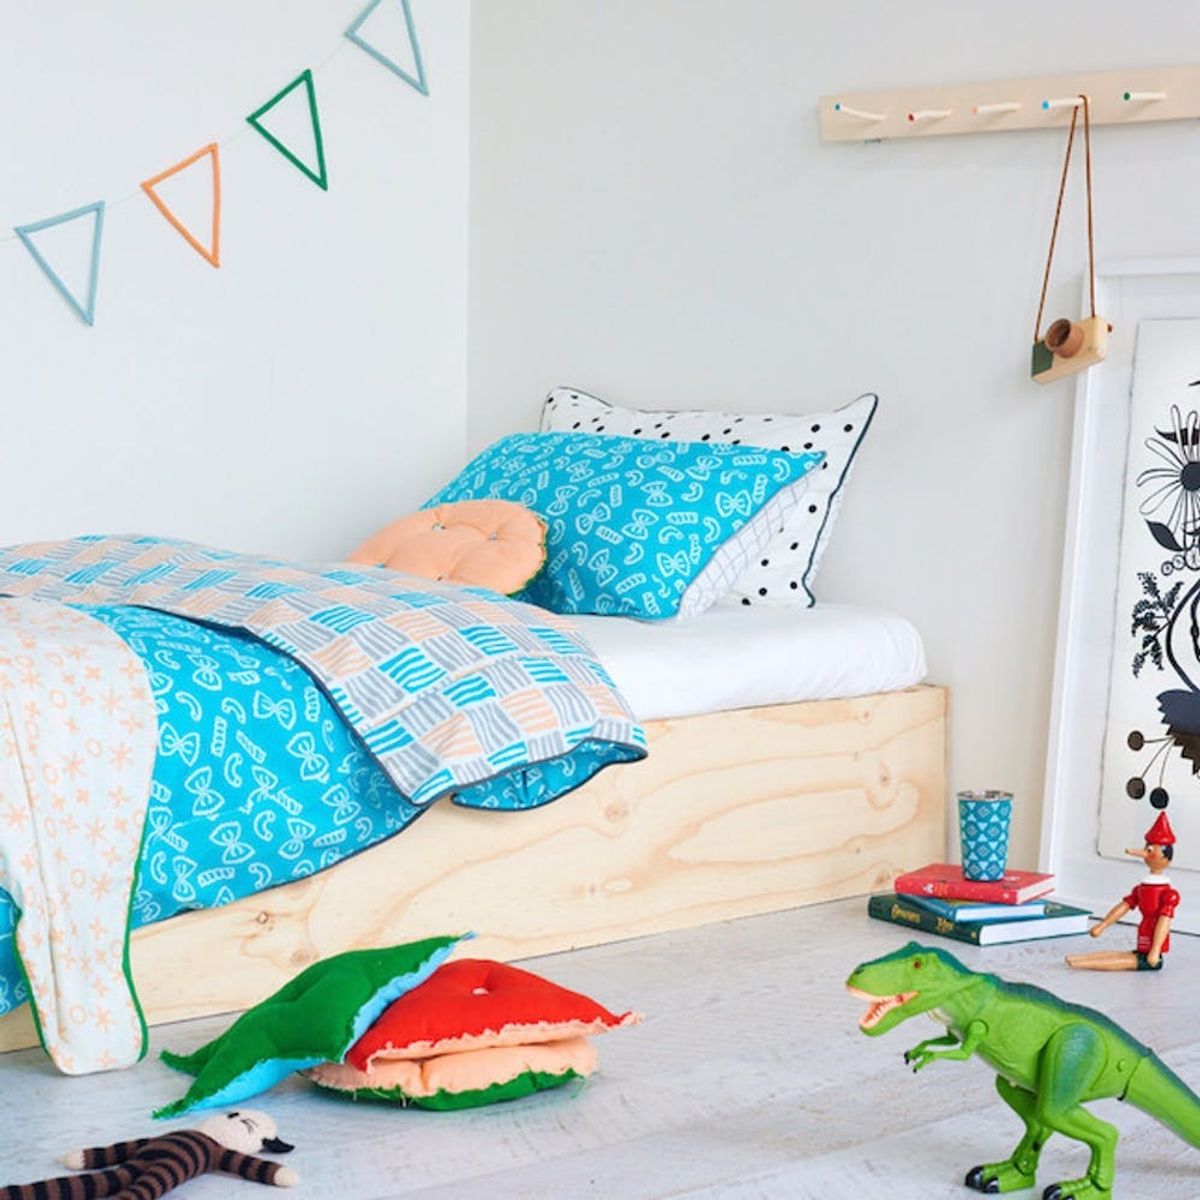 This Kids’ Linen Company Is So Cool You’ll Want It in Your Room